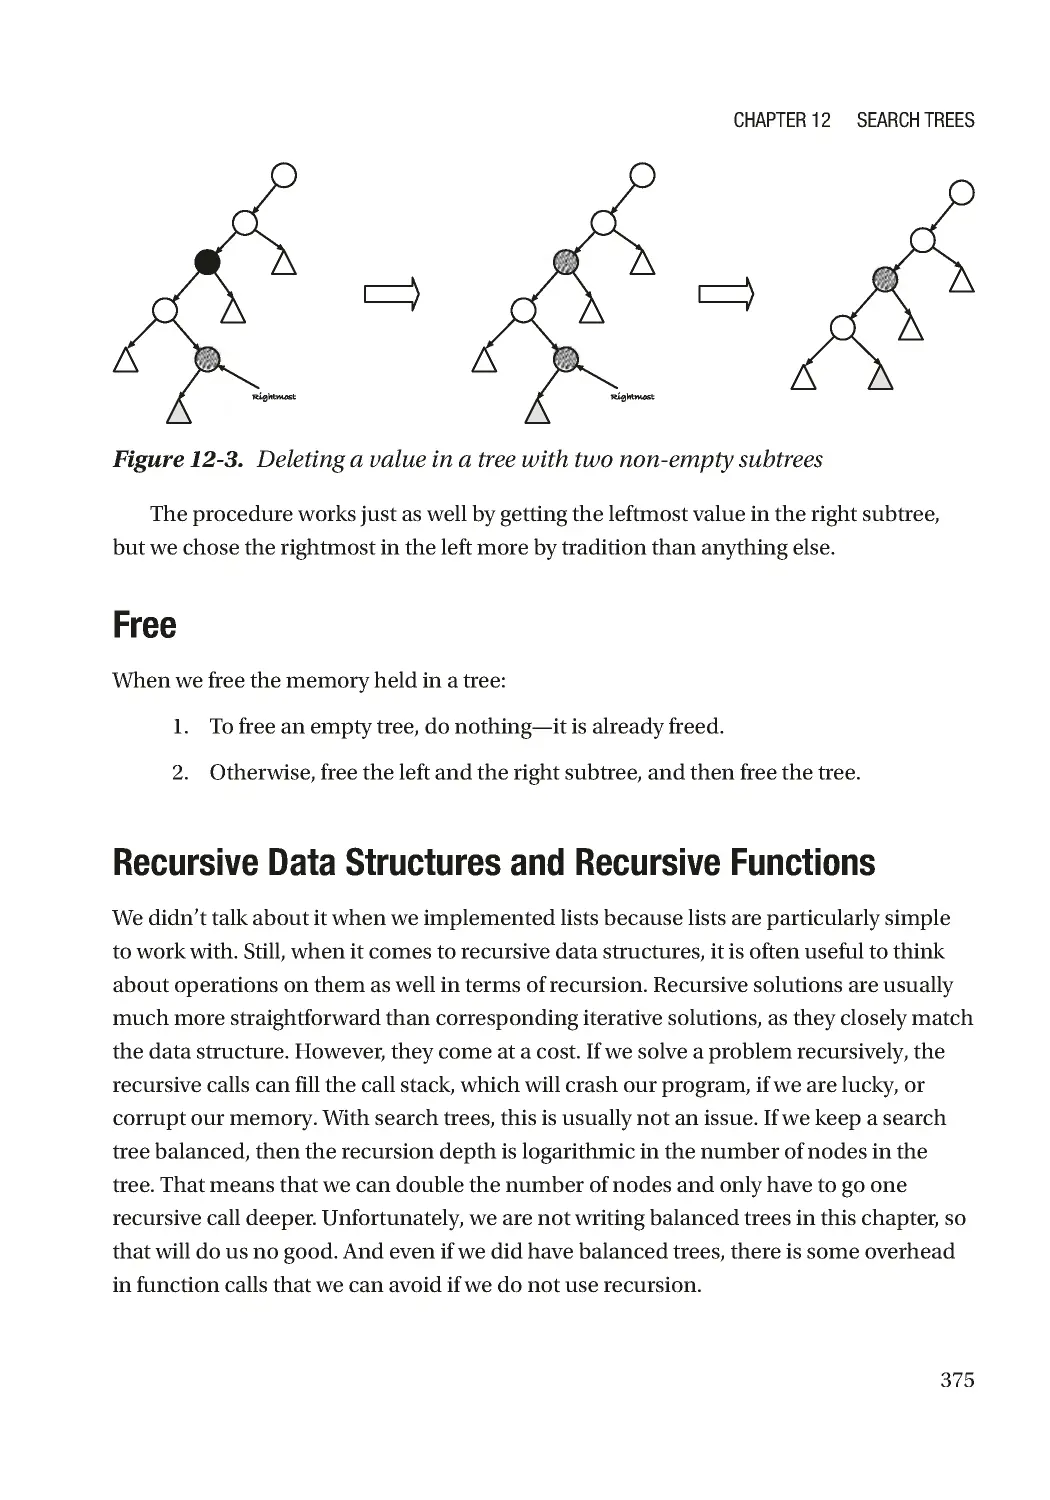 Free
Recursive Data Structures and Recursive Functions